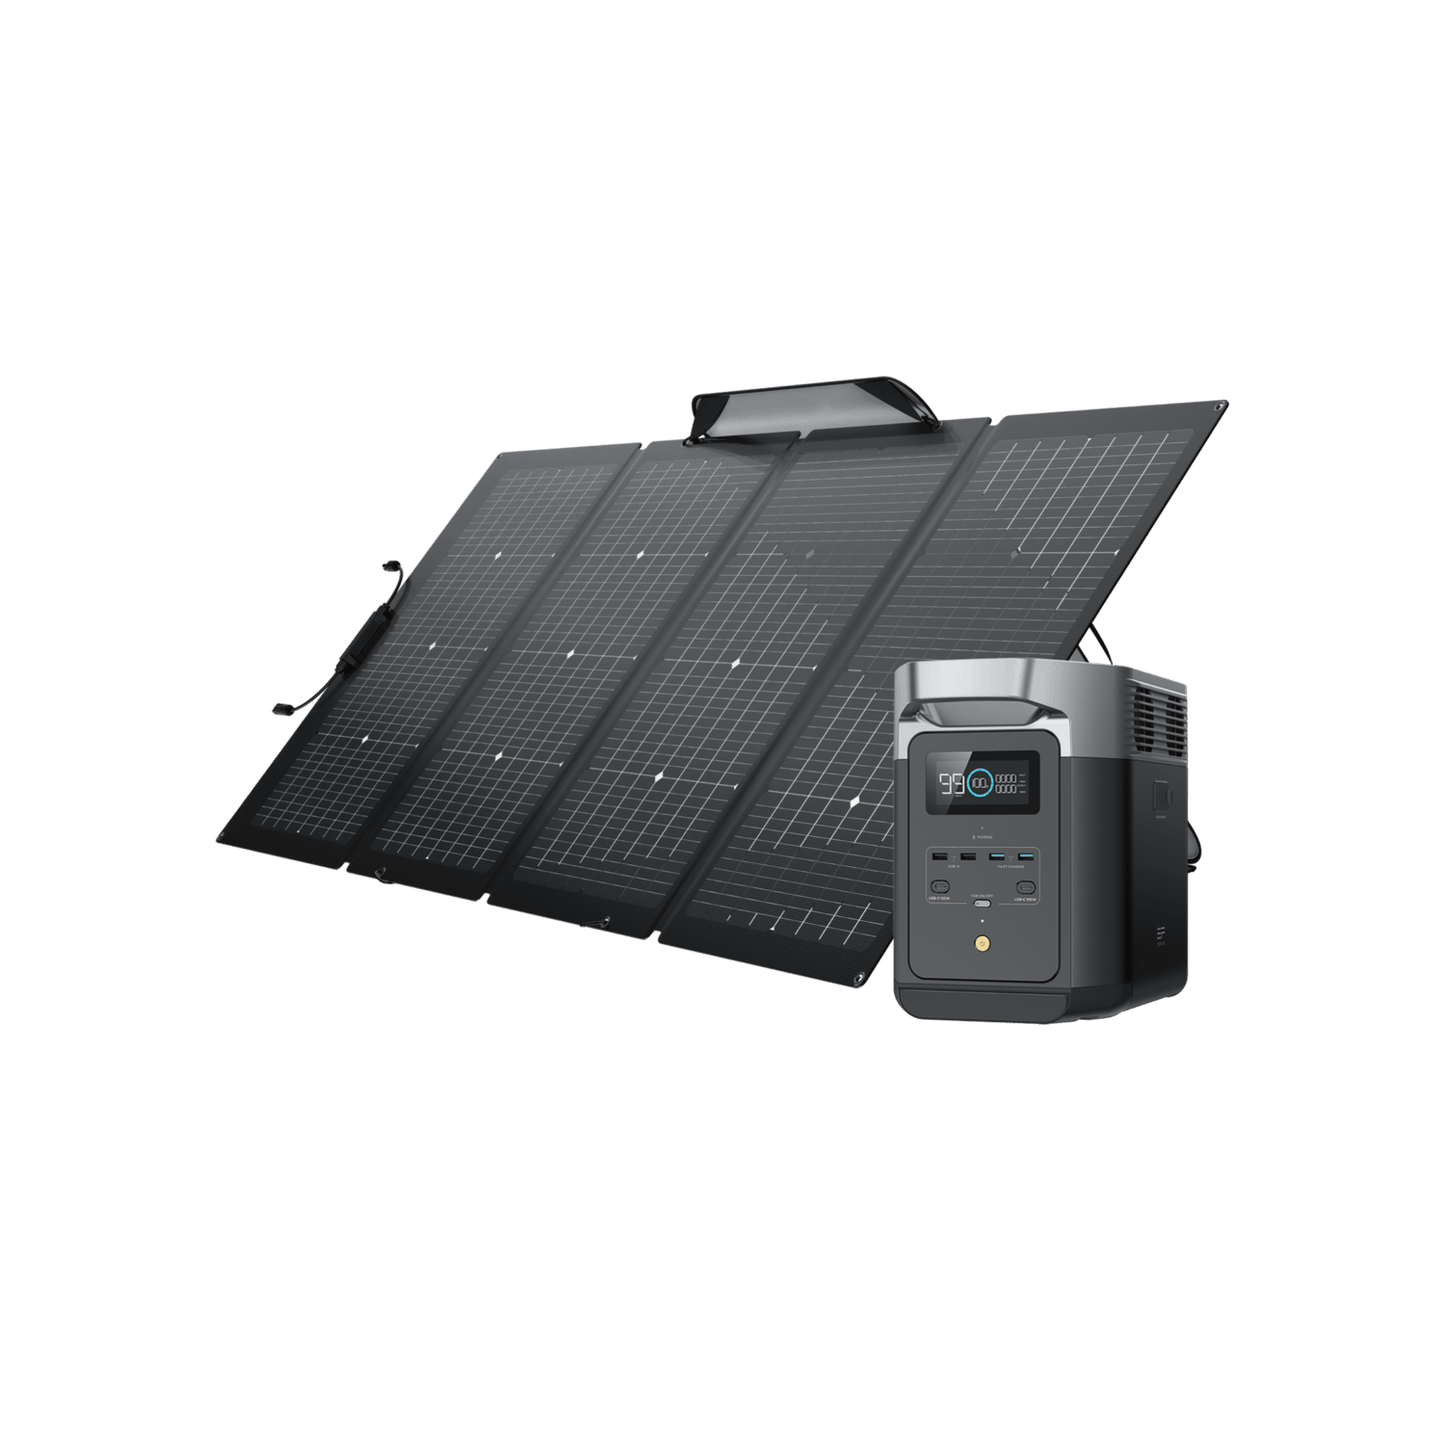 EcoFlow DELTA 2 + 400W Portable Solar Panel - Fast Charging, Solar Generator for Home Backup Power, Camping & RVs